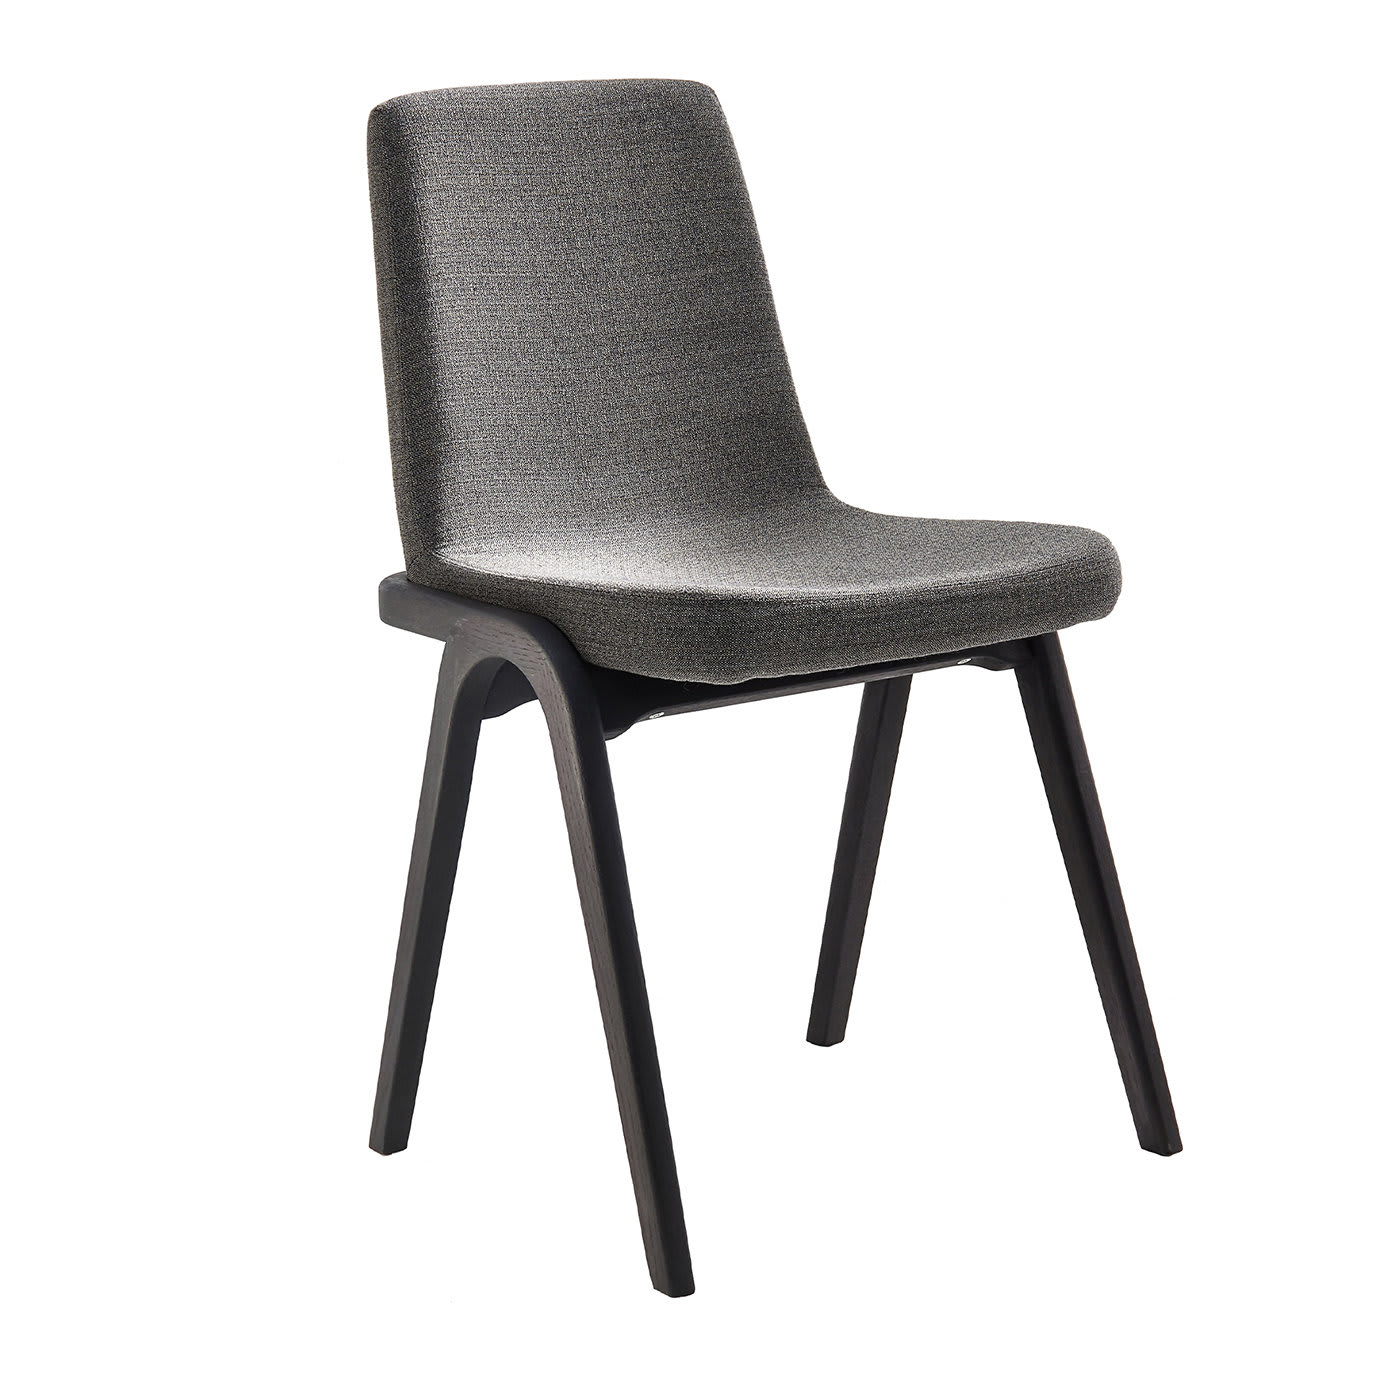 Decanter Black Ash Chair with Anthracite Upholstery - Passoni Design